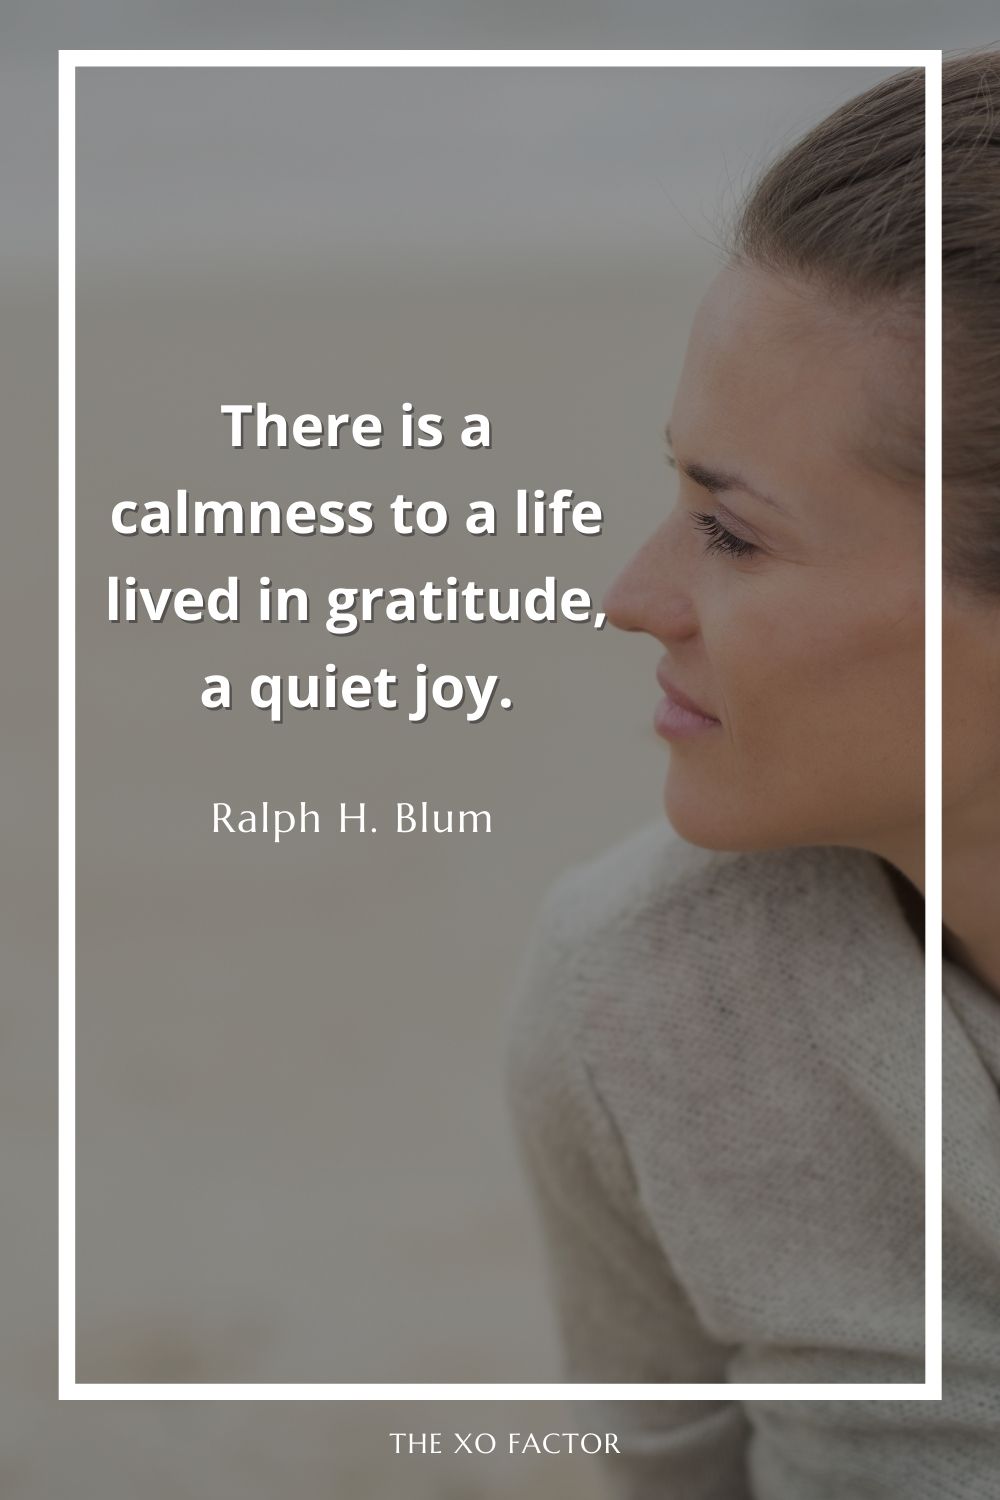 There is a calmness to a life lived in gratitude, a quiet joy. Gratitude quotes